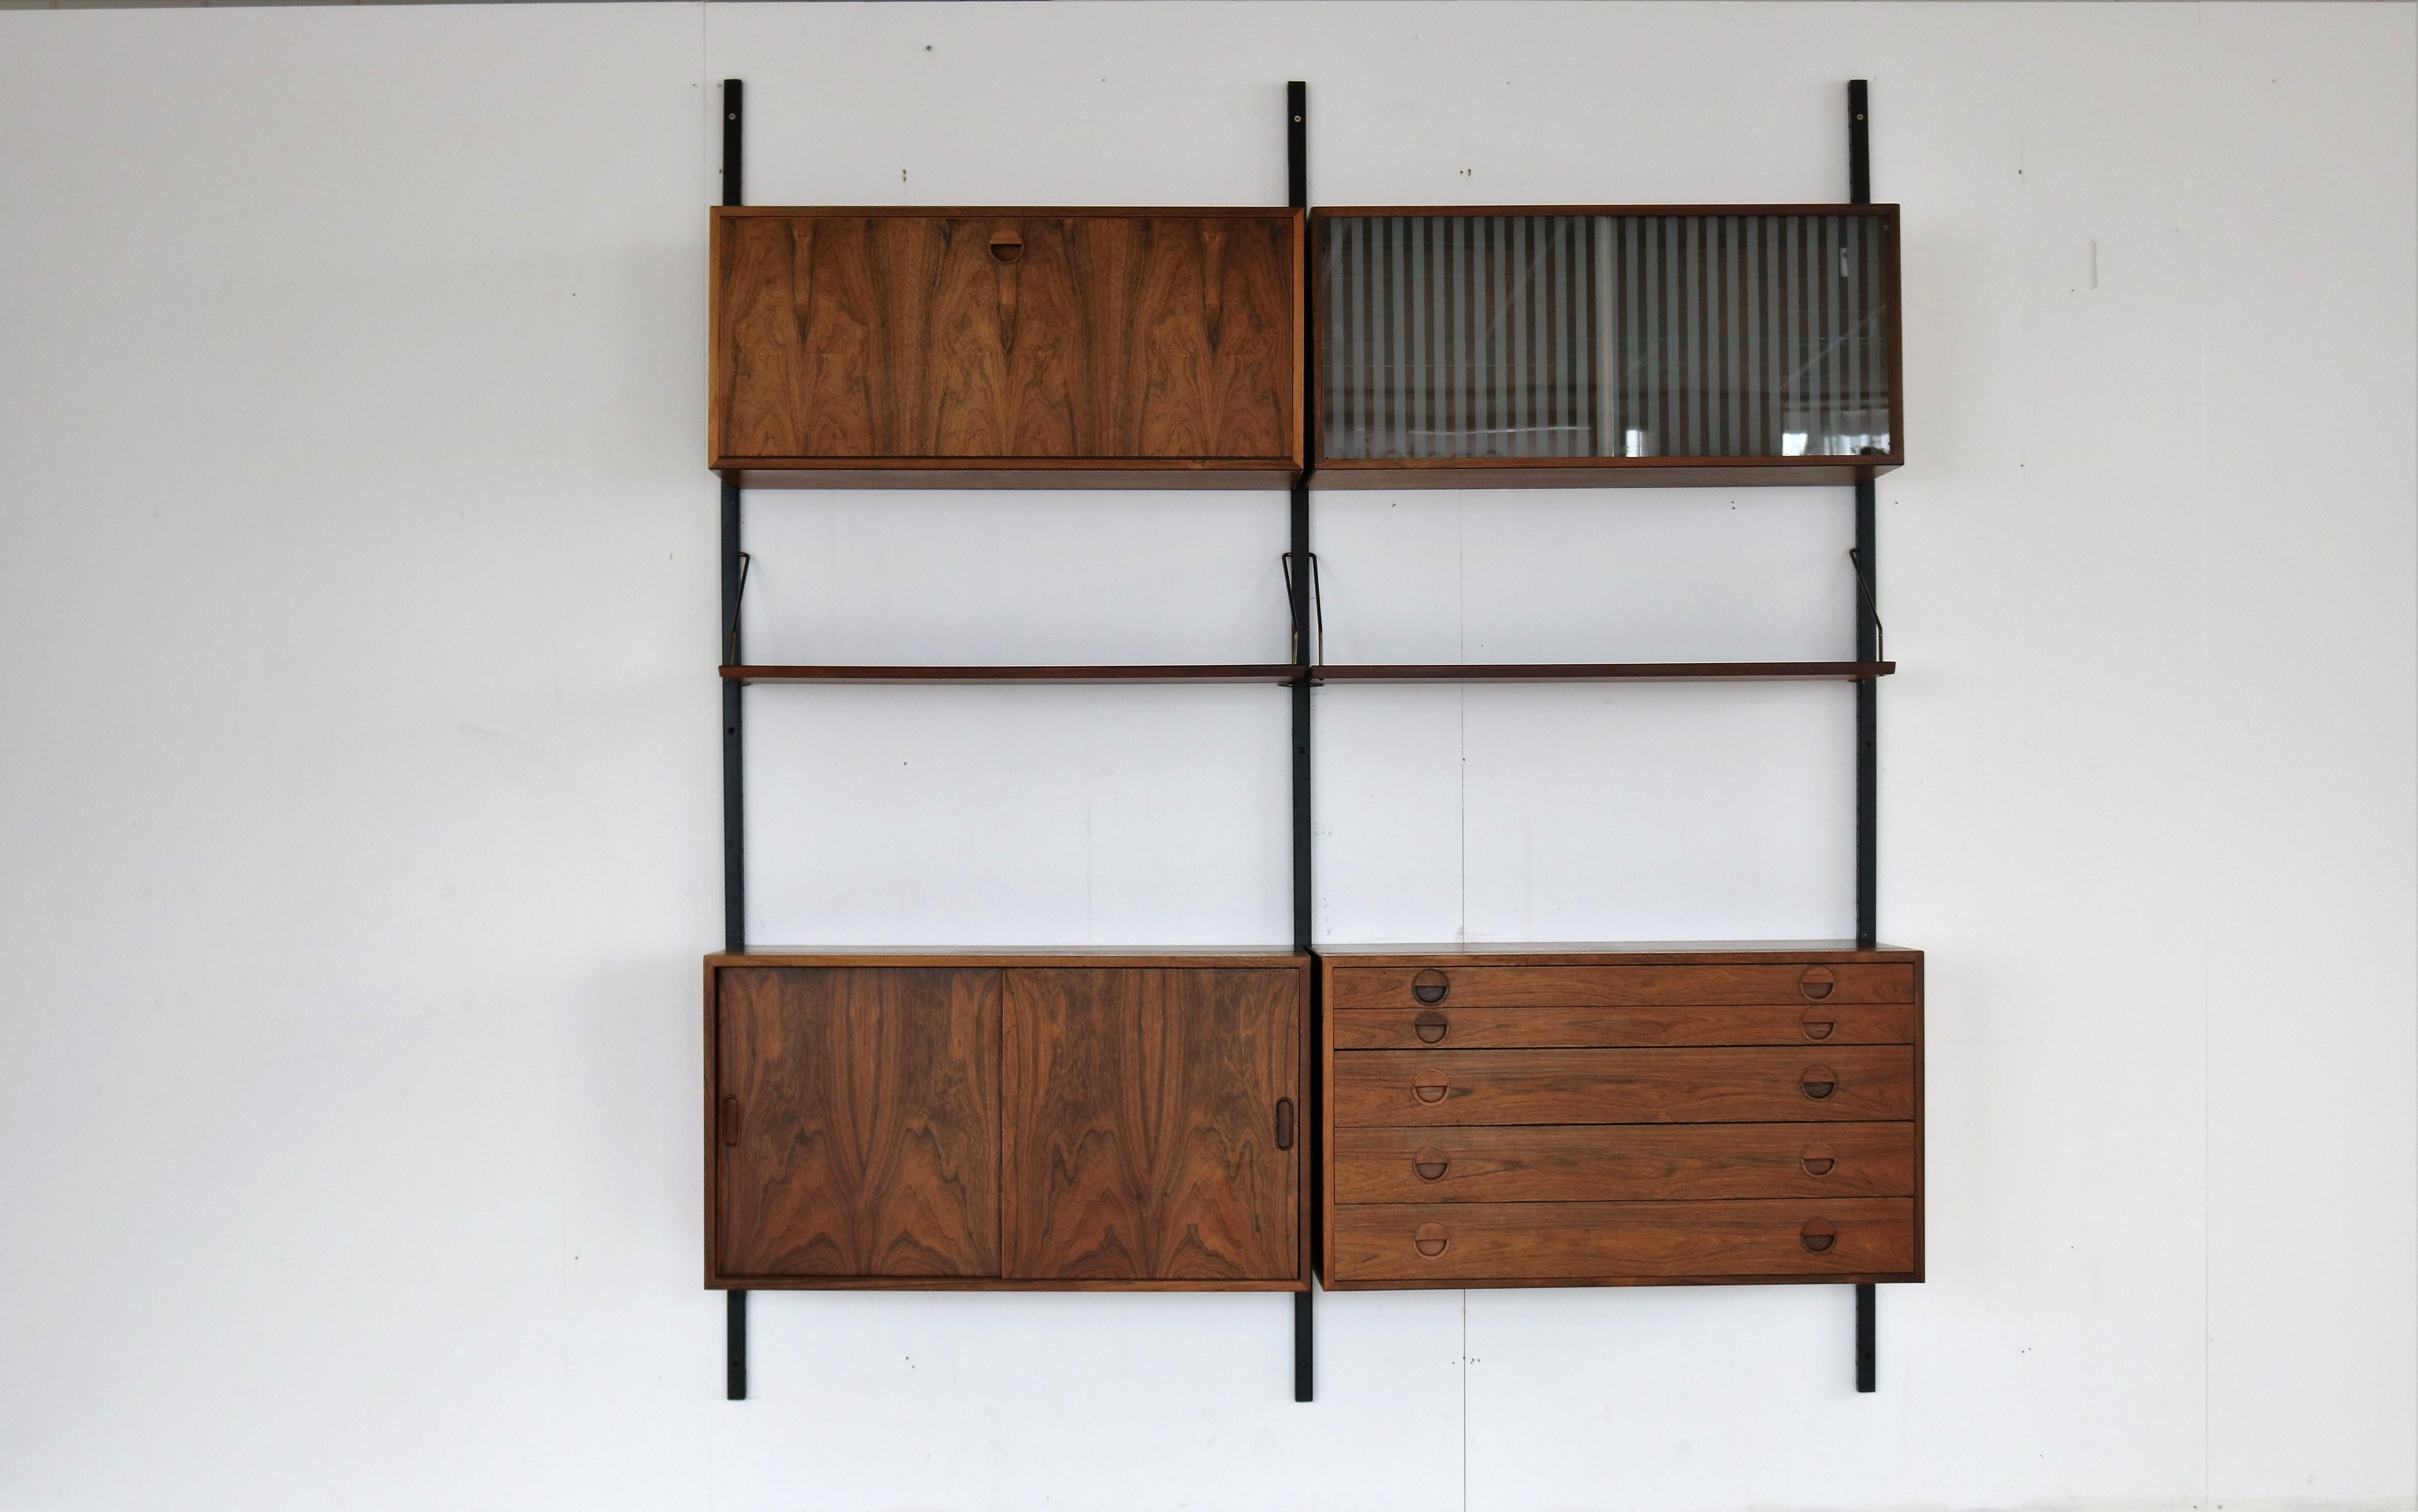 vintage wall system rosewood HG Furniture Danish (3)

Rosewood wall system from HG Furniture. The system is of high quality and can be arranged according to your own wishes.

period 1960s
designs HG Furniture Denmark
conditions good light